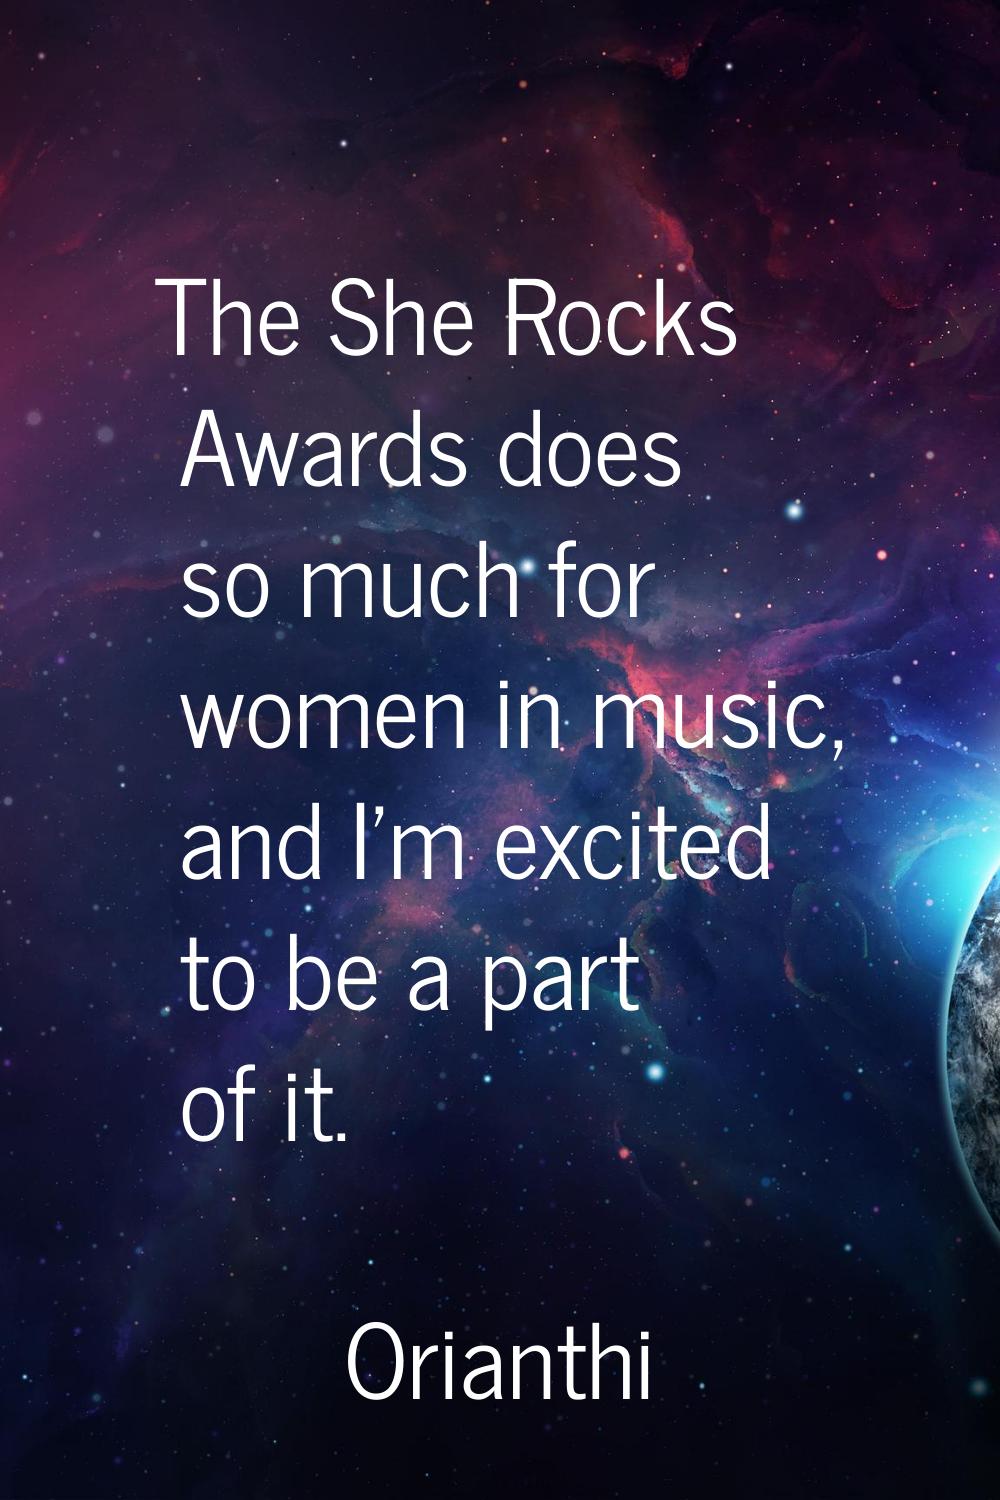 The She Rocks Awards does so much for women in music, and I'm excited to be a part of it.